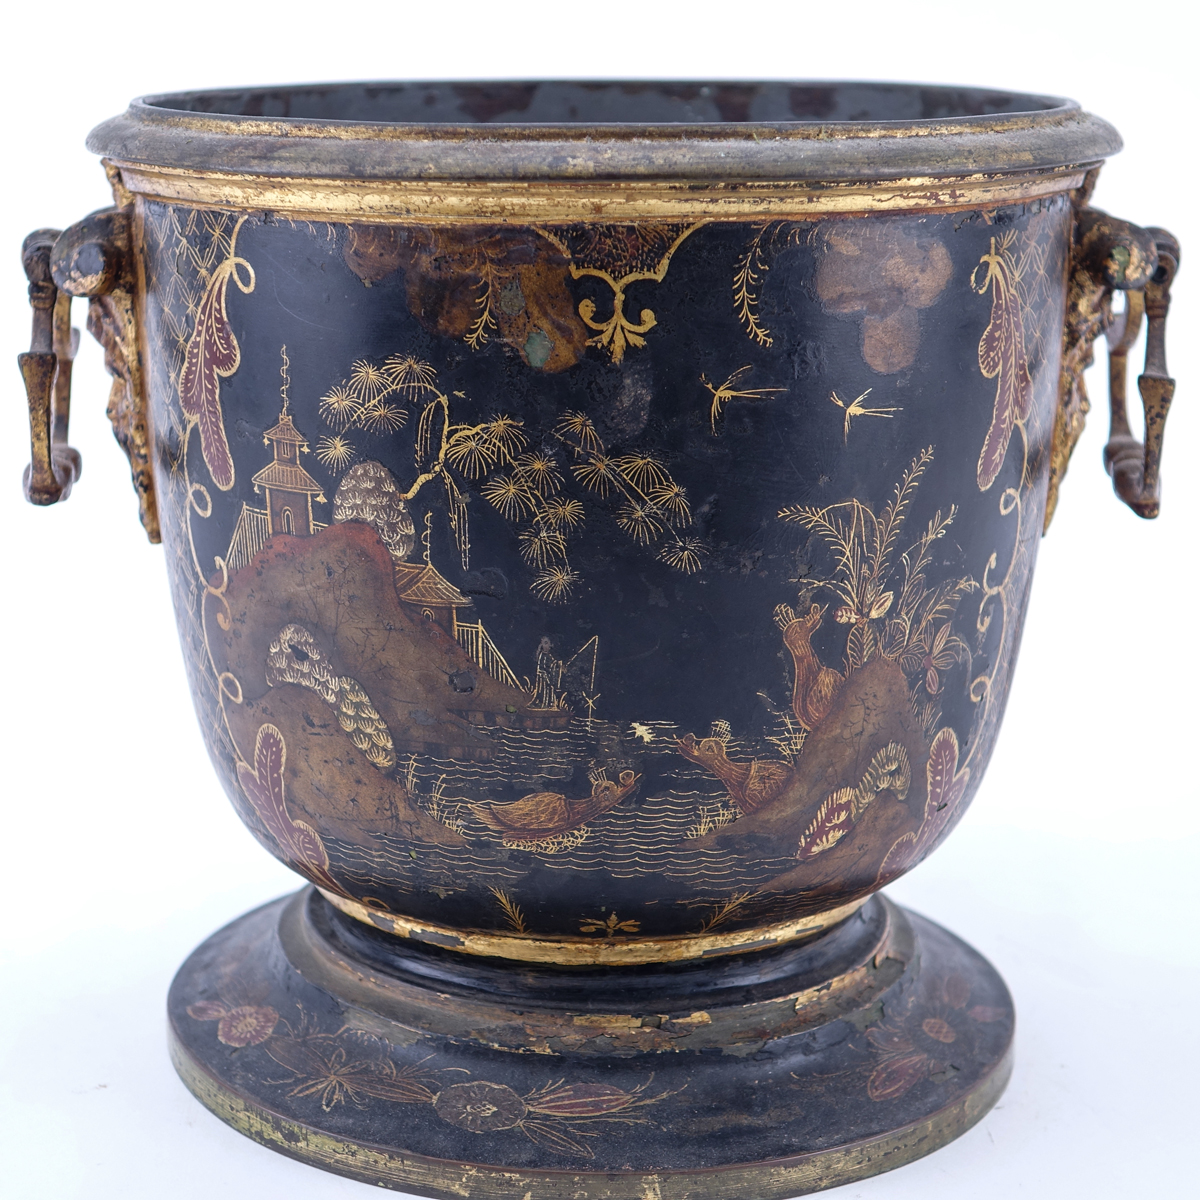 Antique style Toleware Cachepot With Chinese Motif. Unsigned.